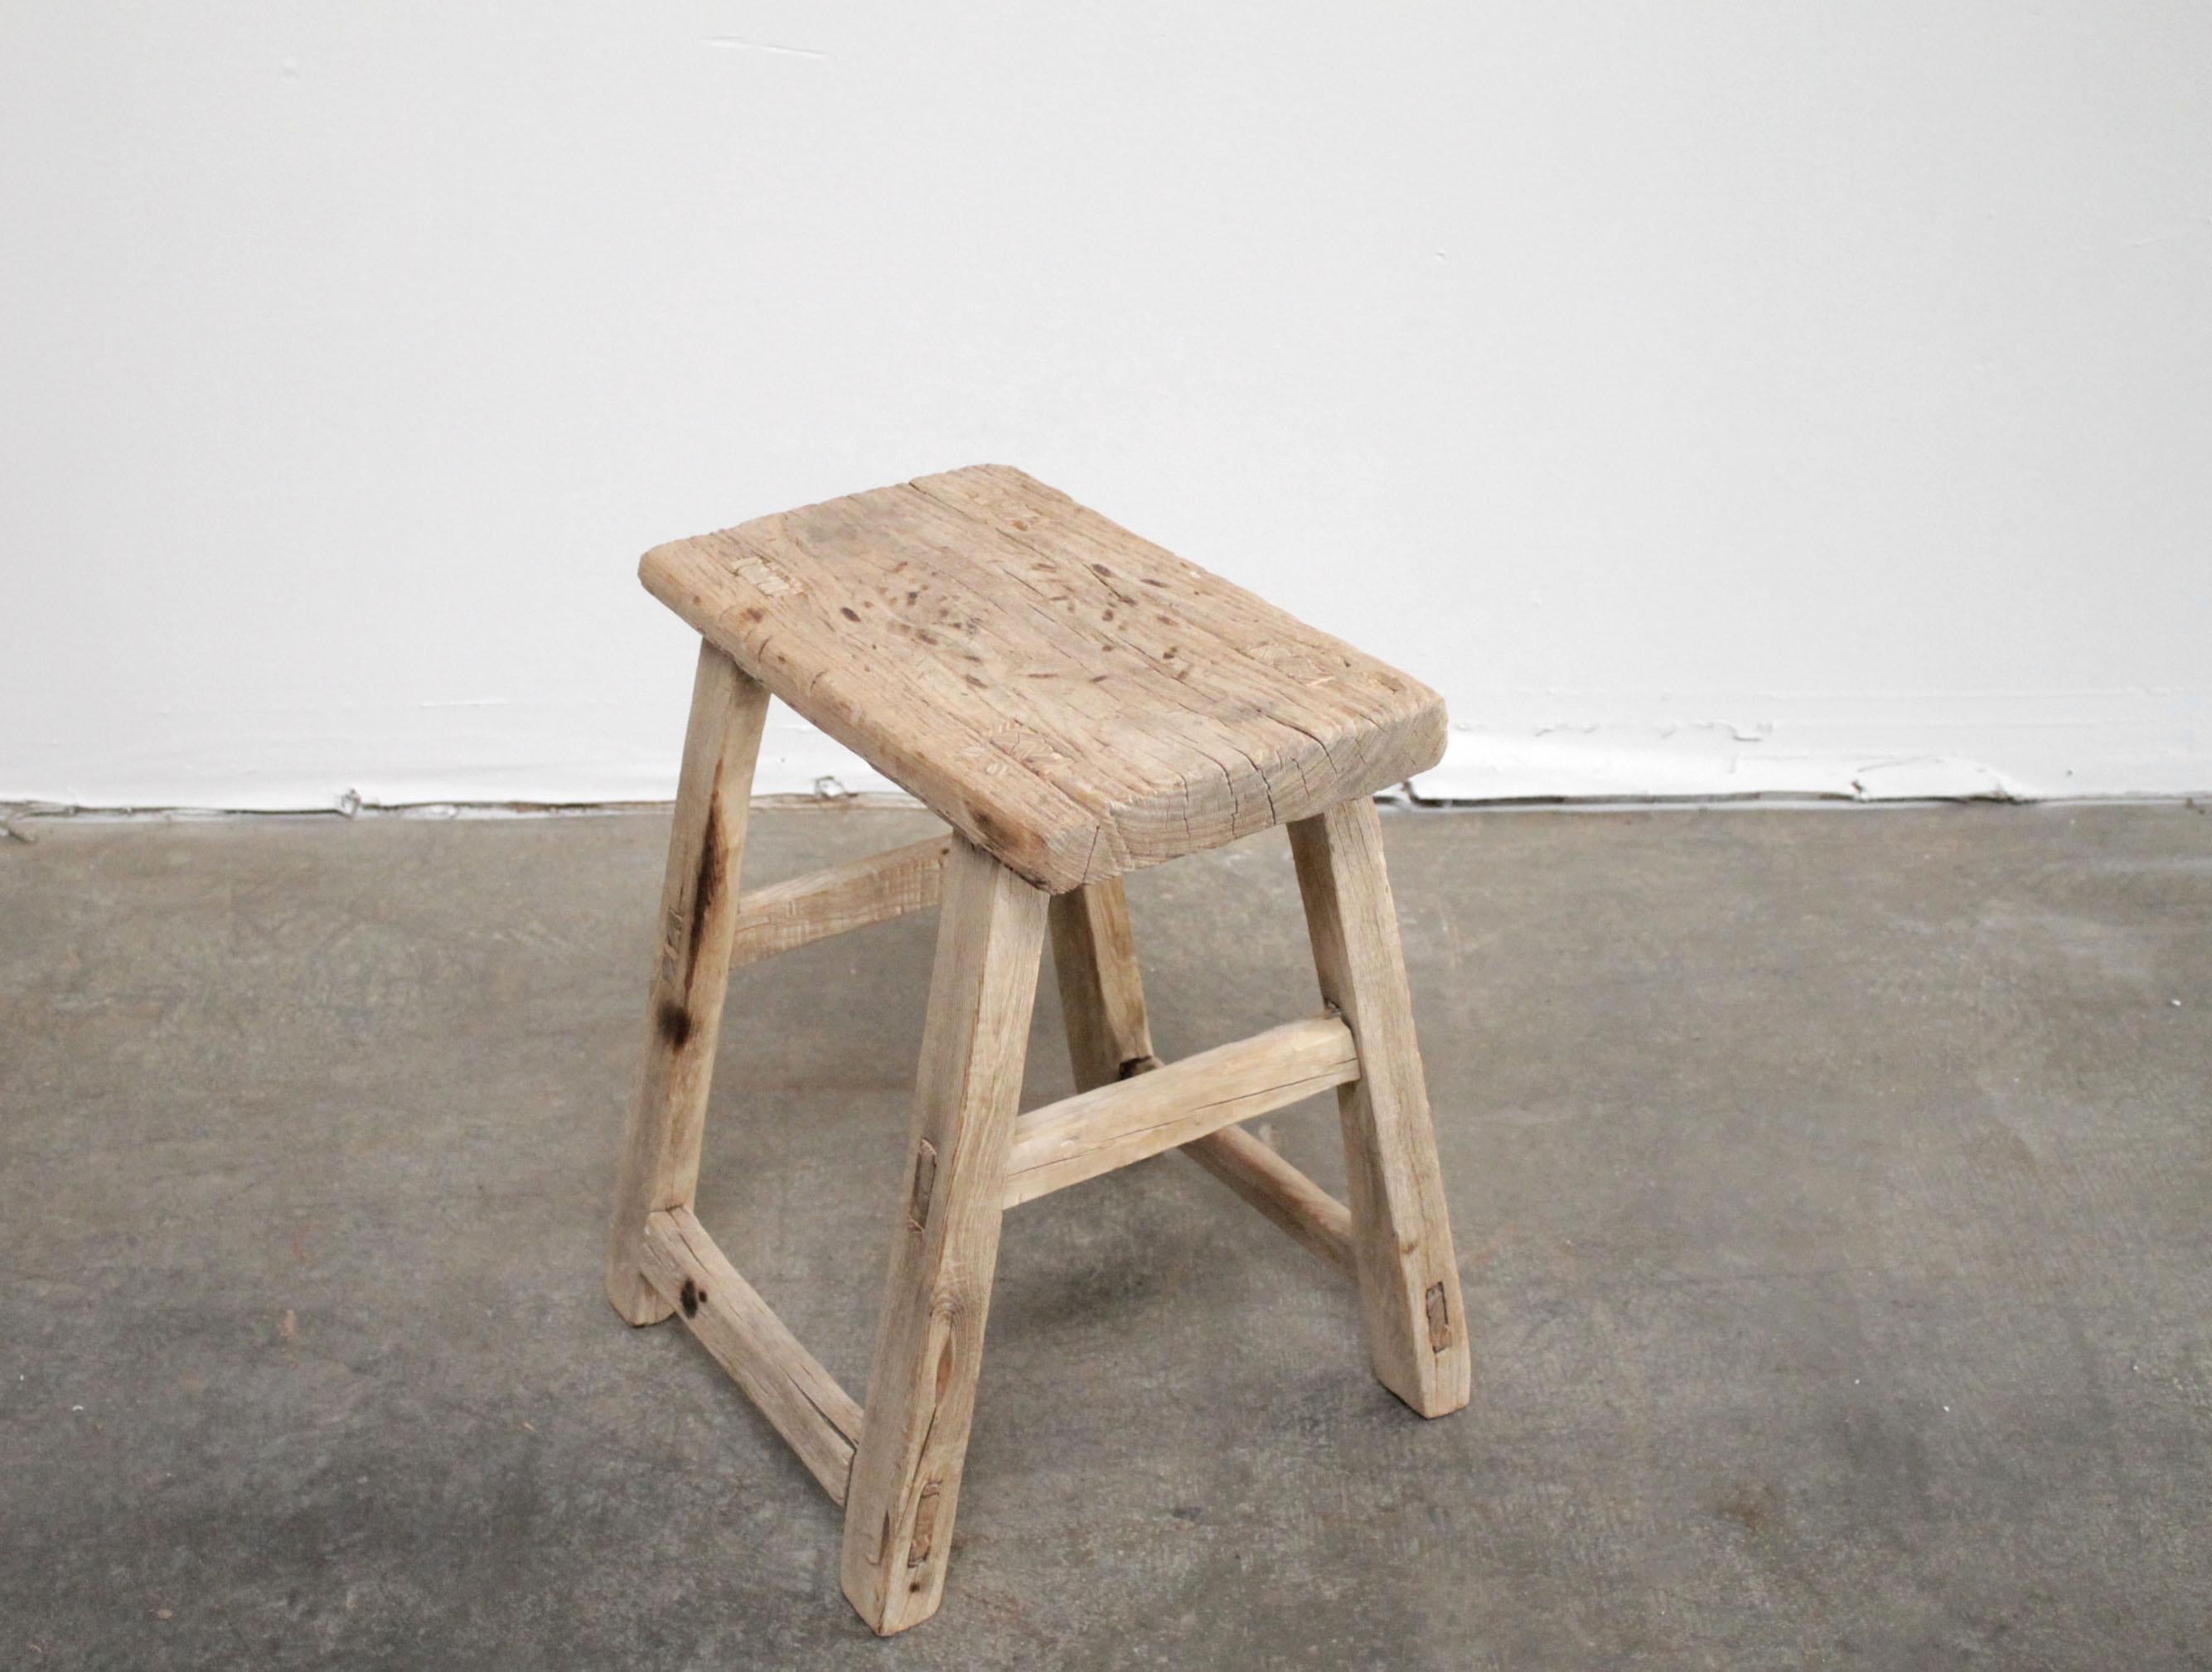 Vintage antique elmwood stool
These are the real vintage antique elm wood stools! Beautiful antique patina, with weathering and age, these are solid and sturdy ready for daily use, use as a table, stool, drink table, they are great for any space.